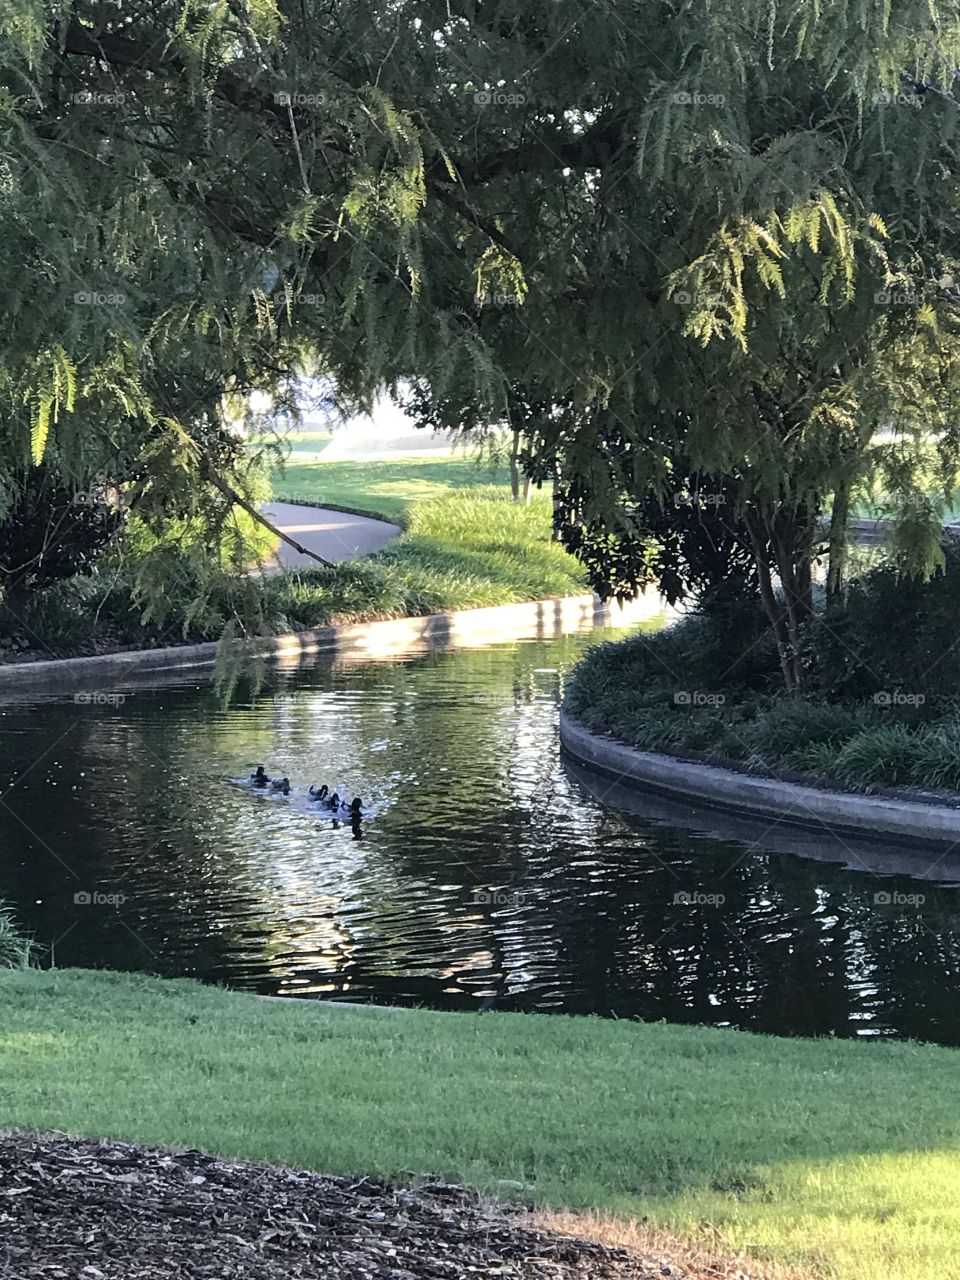 Ducks playing follow the leader